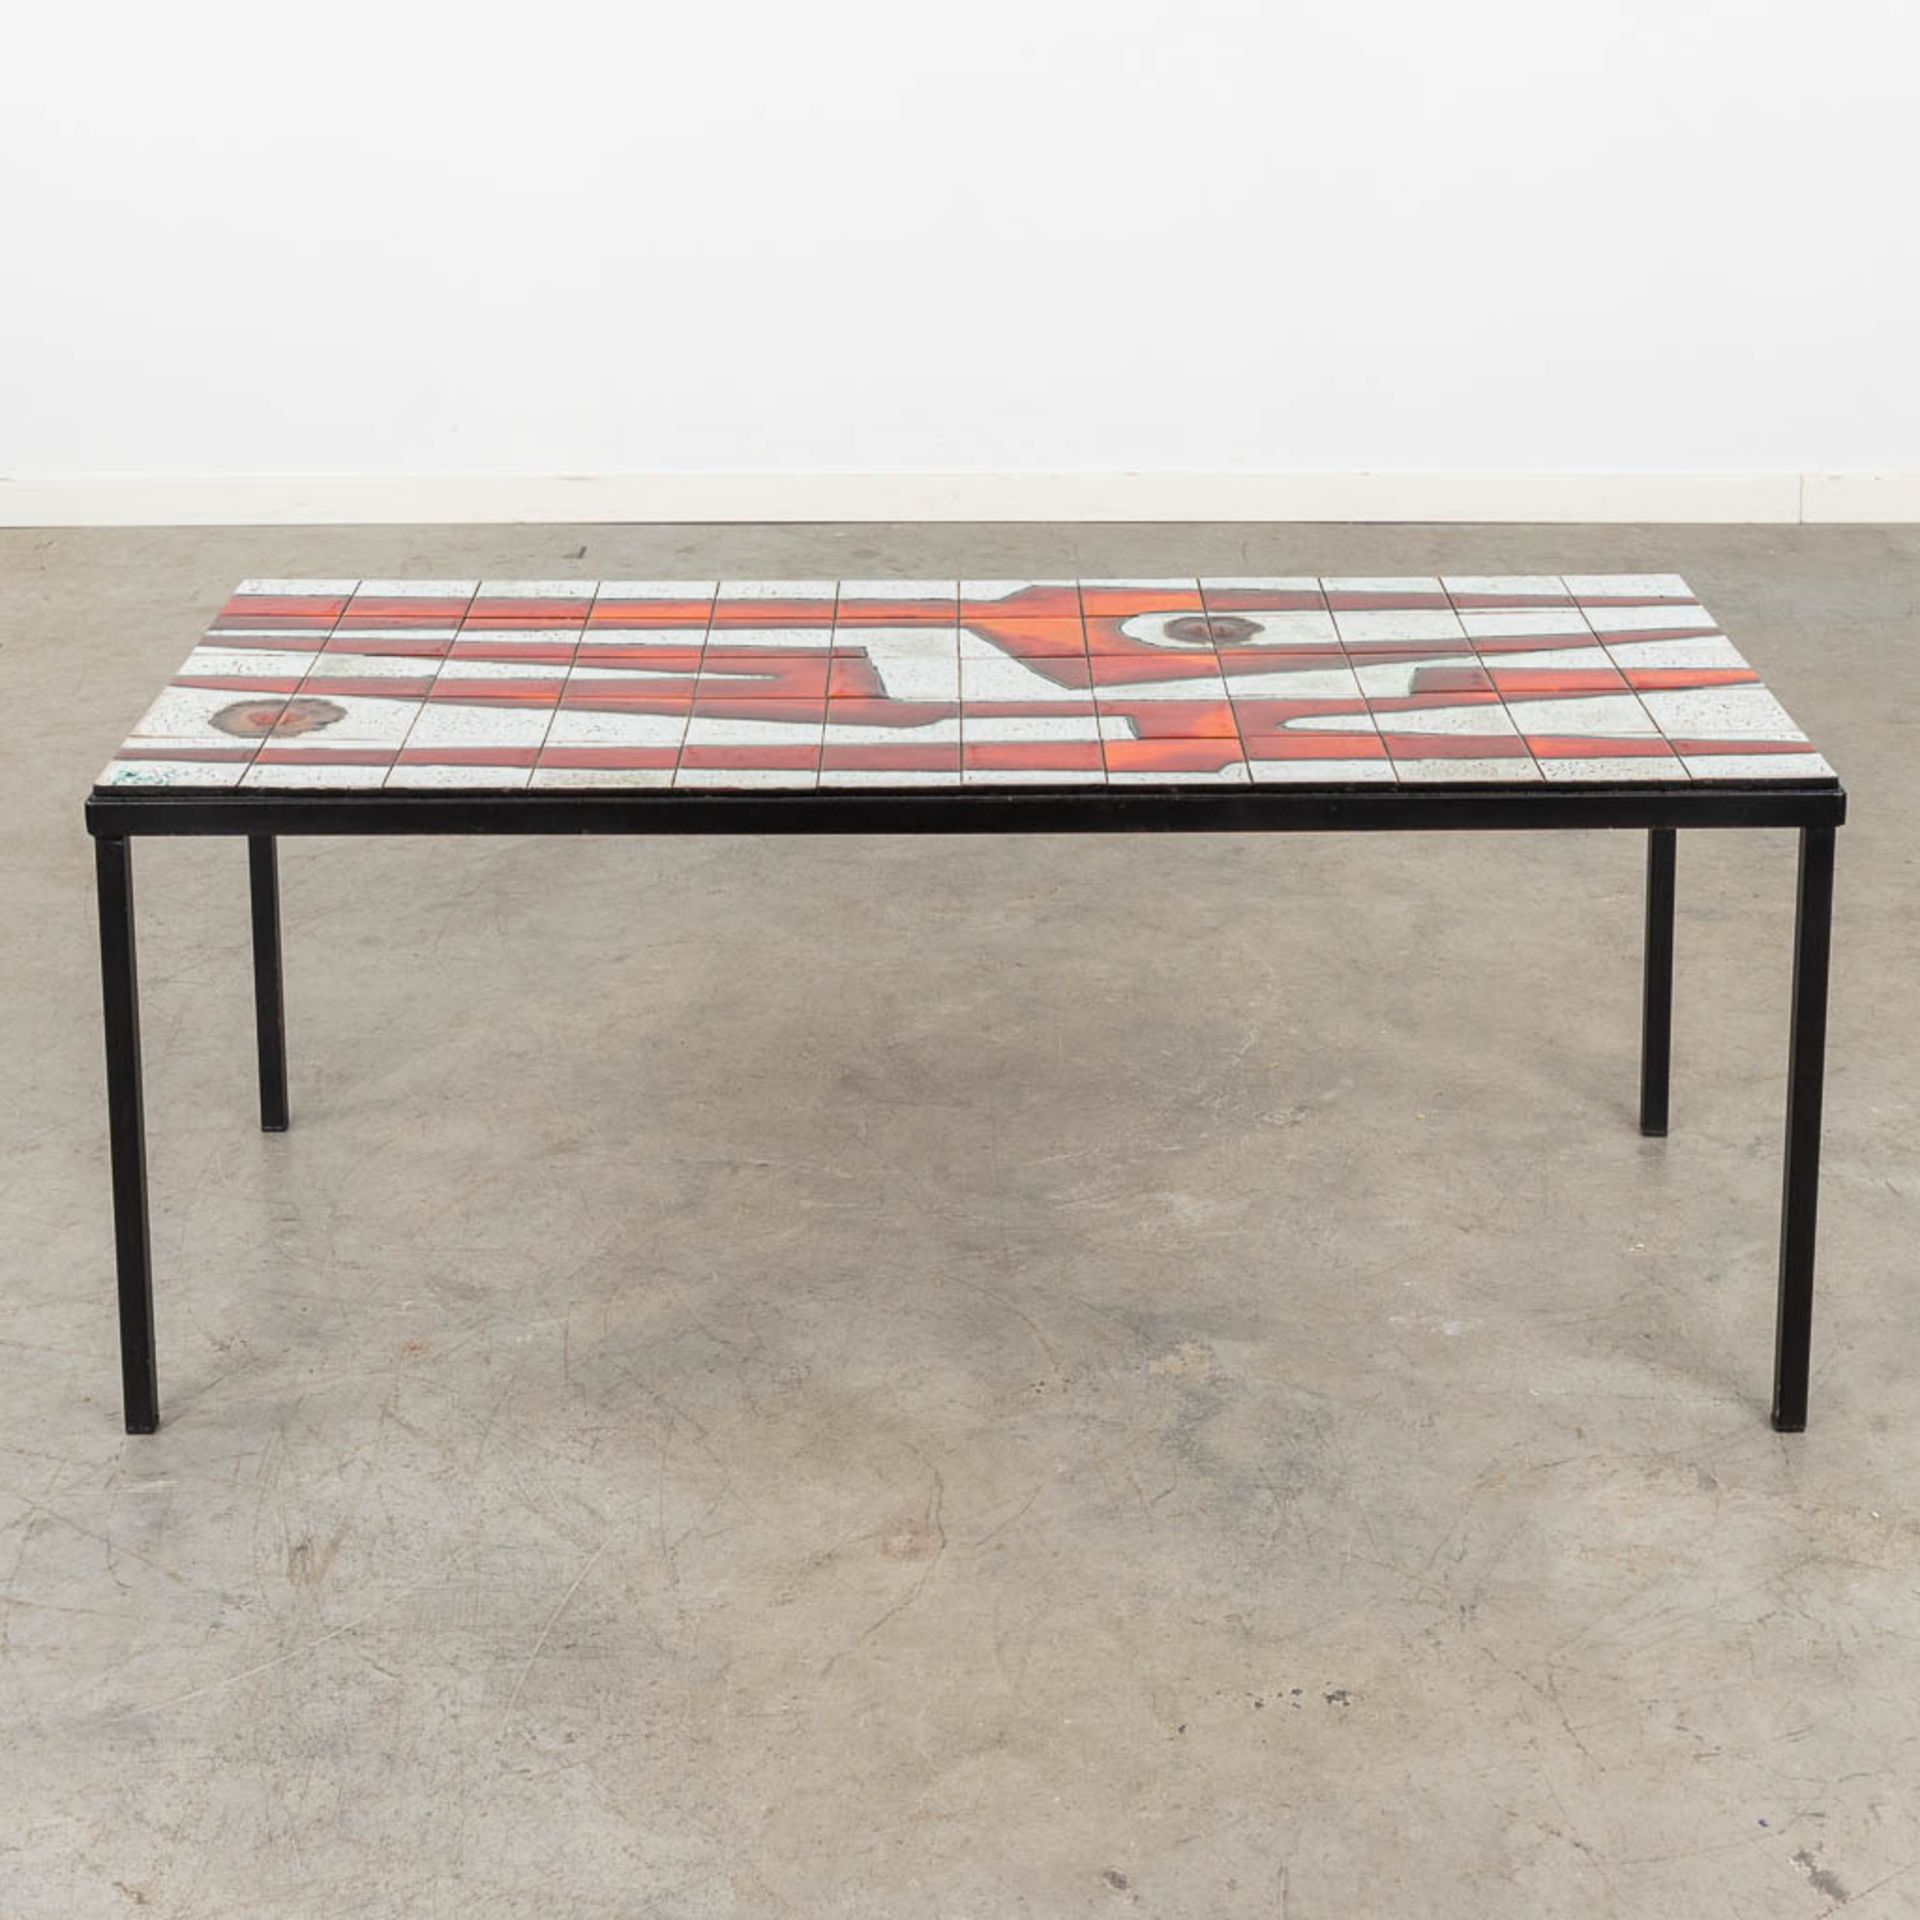 Pierre OOSTERLINCK (XX) 'Coffee table' glazed ceramics on a metal base. (D:50 x W:120 x H:50 cm) - Image 3 of 8